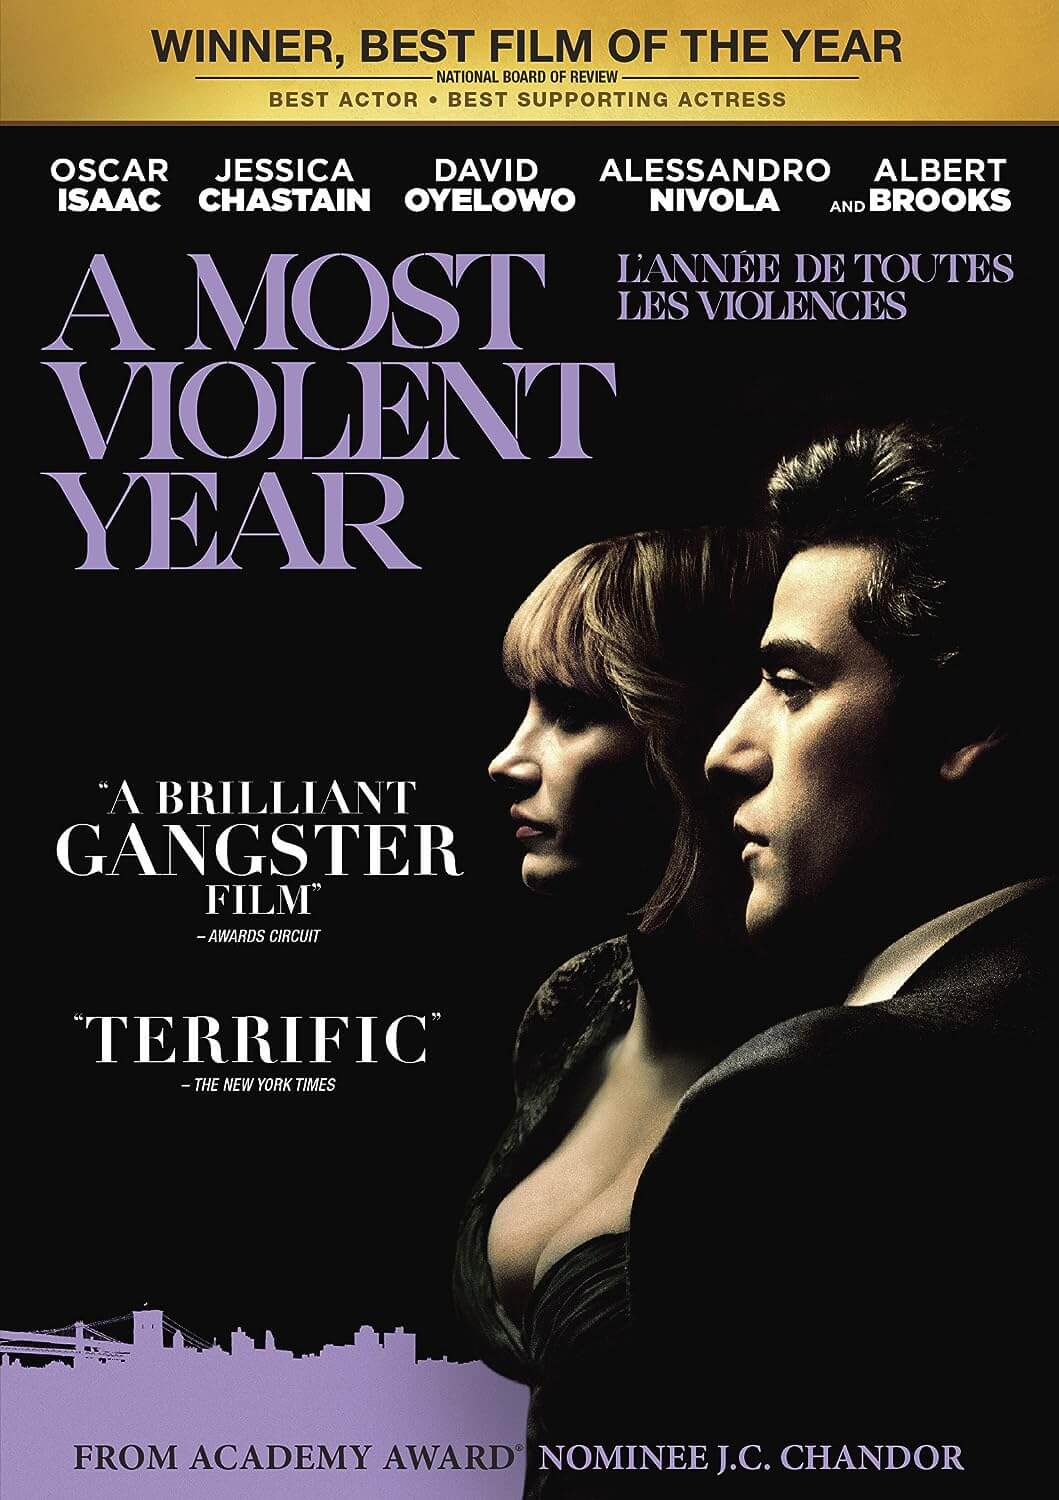 “A Most Violent Year” (2014)